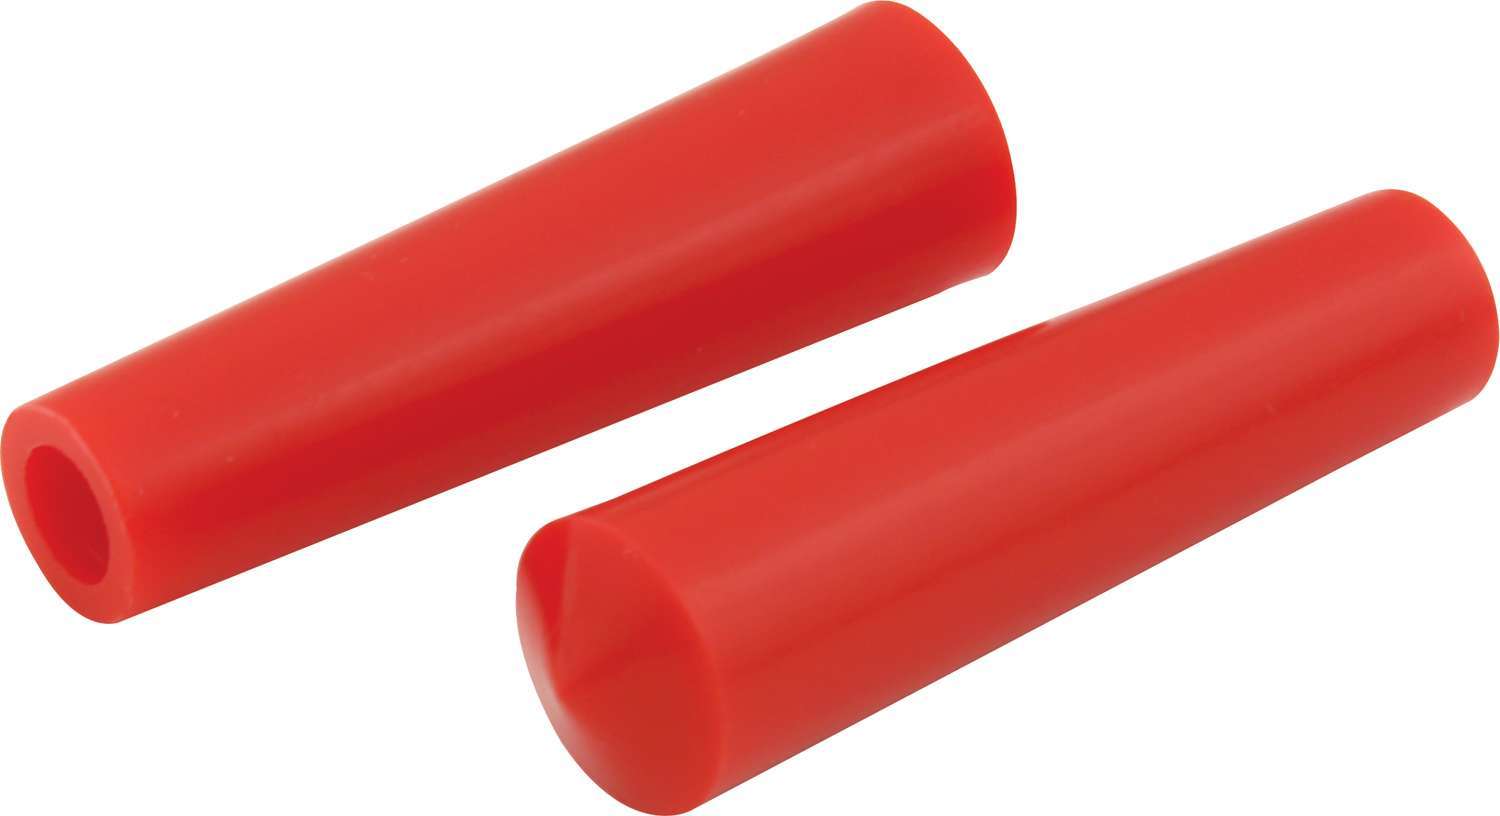 Toggle Extensions Red Pair